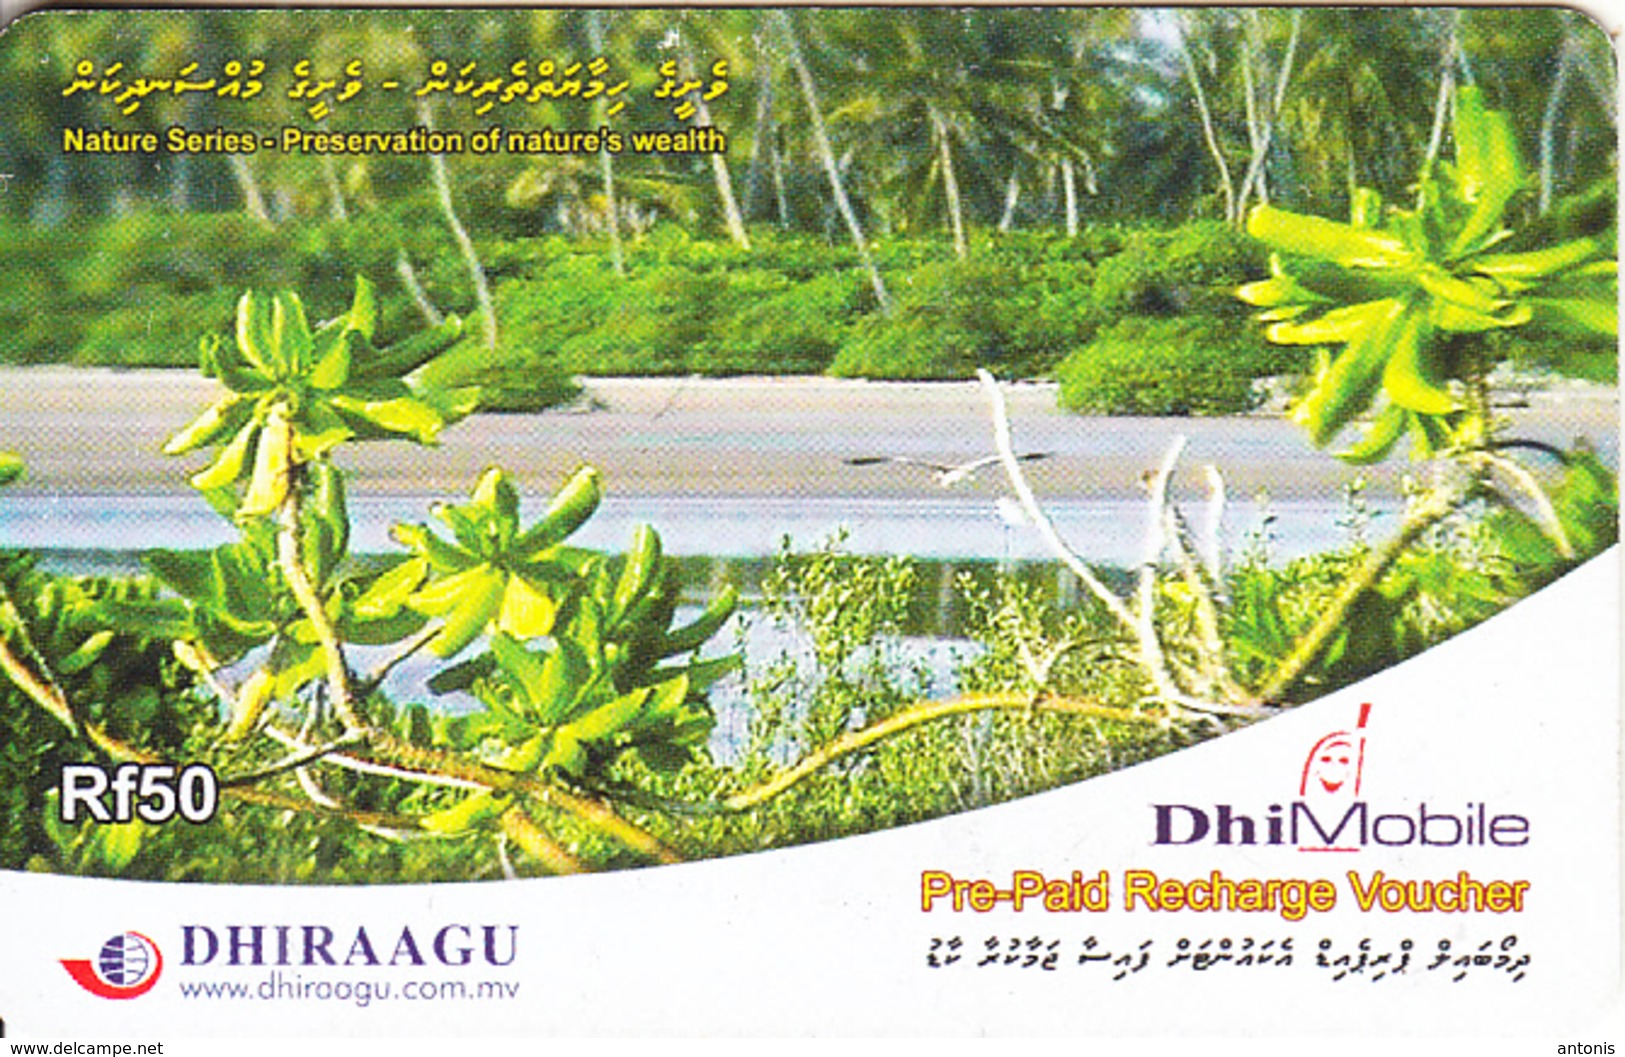 MALDIVES ISL. - Nature/Preservation Of Nature's Wealth, DHI Mobile By Dhiraagu Recharge Card Rf 50, Used - Maldives